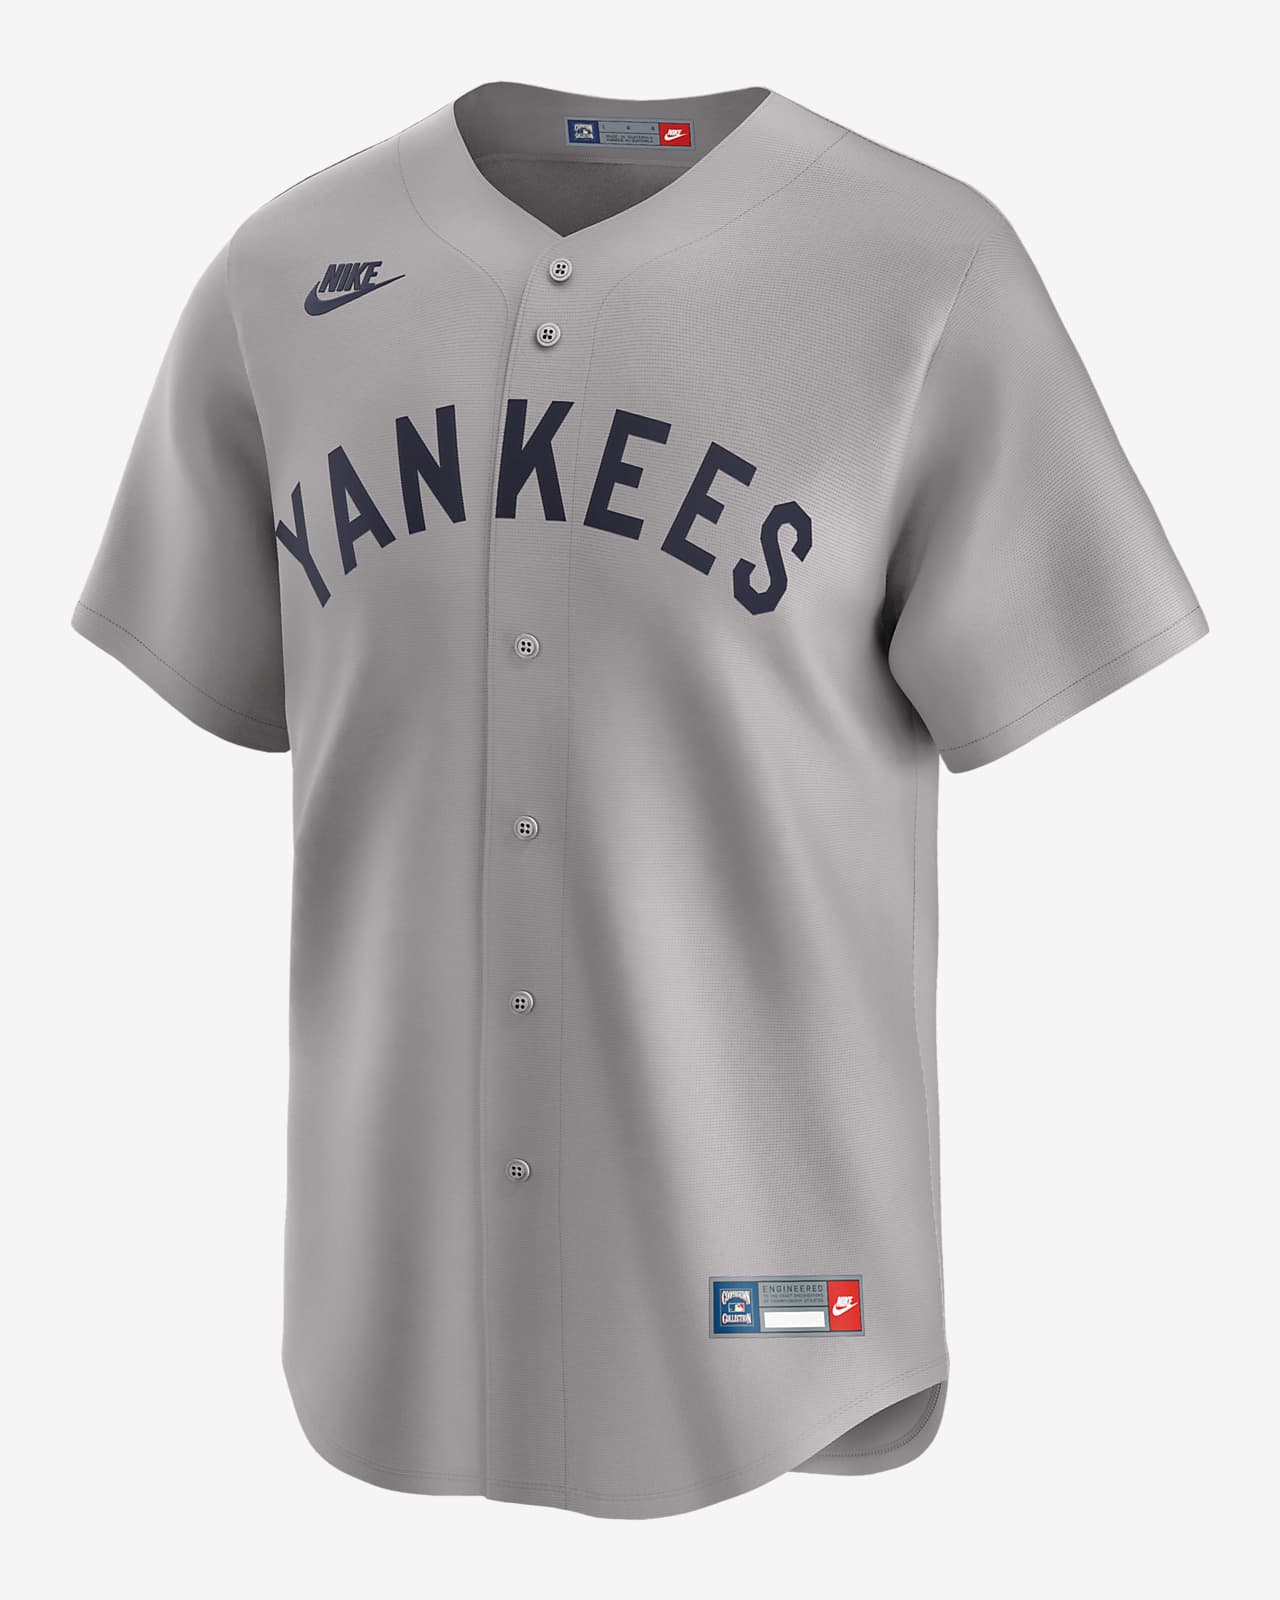 Jersey Nike Dri-FIT ADV de la MLB Limited para hombre New York Yankees Cooperstown